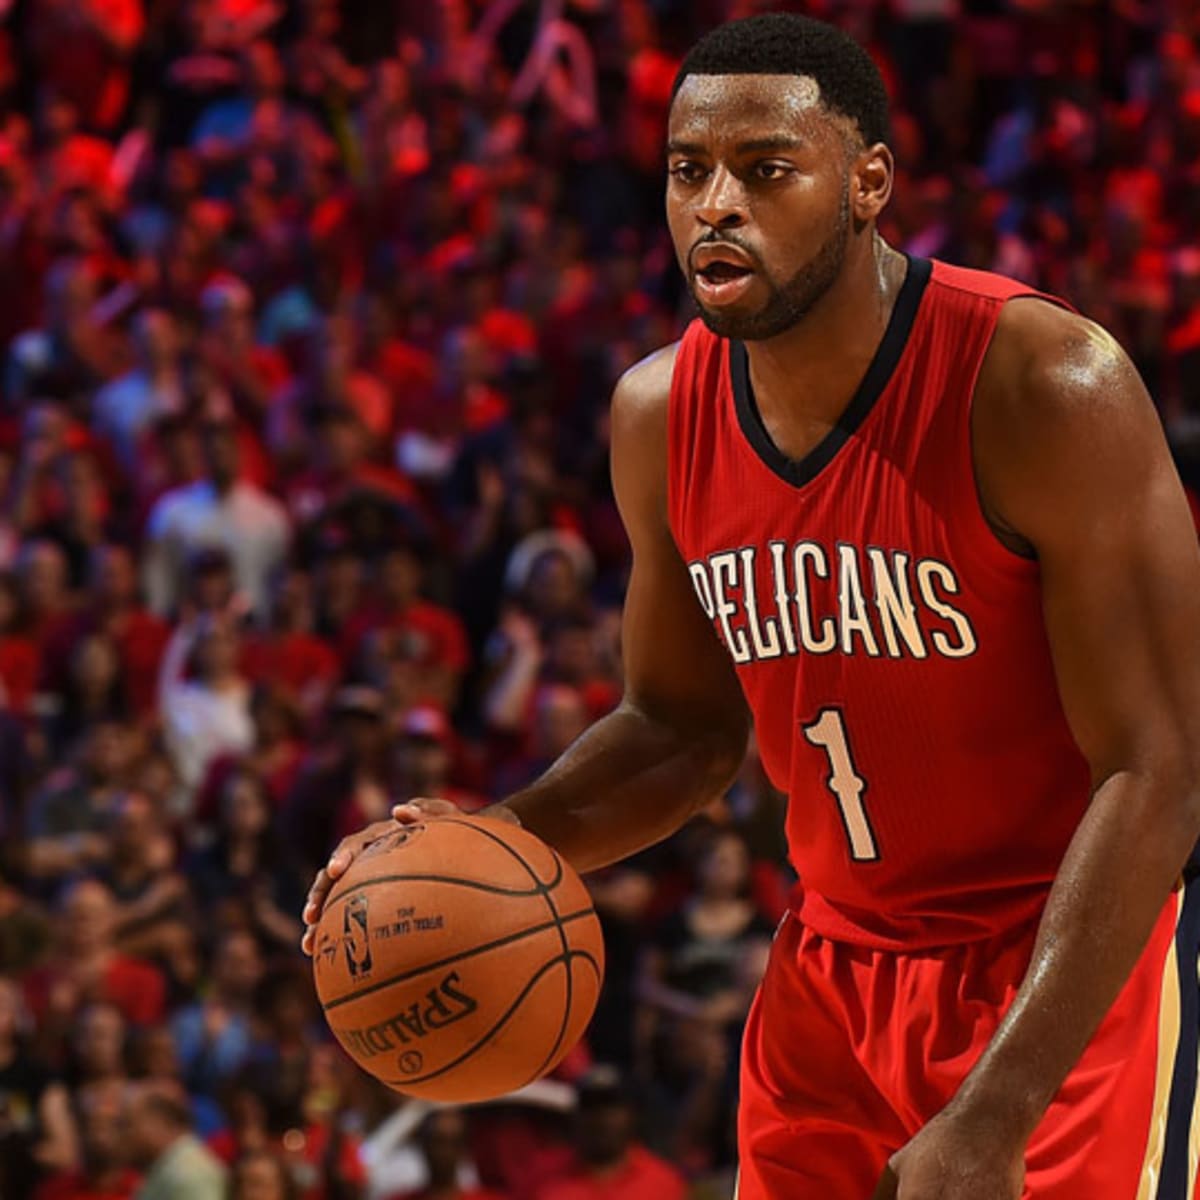 Tyreke Evans doesn't want Kings to match Pelicans' offer - NBC Sports